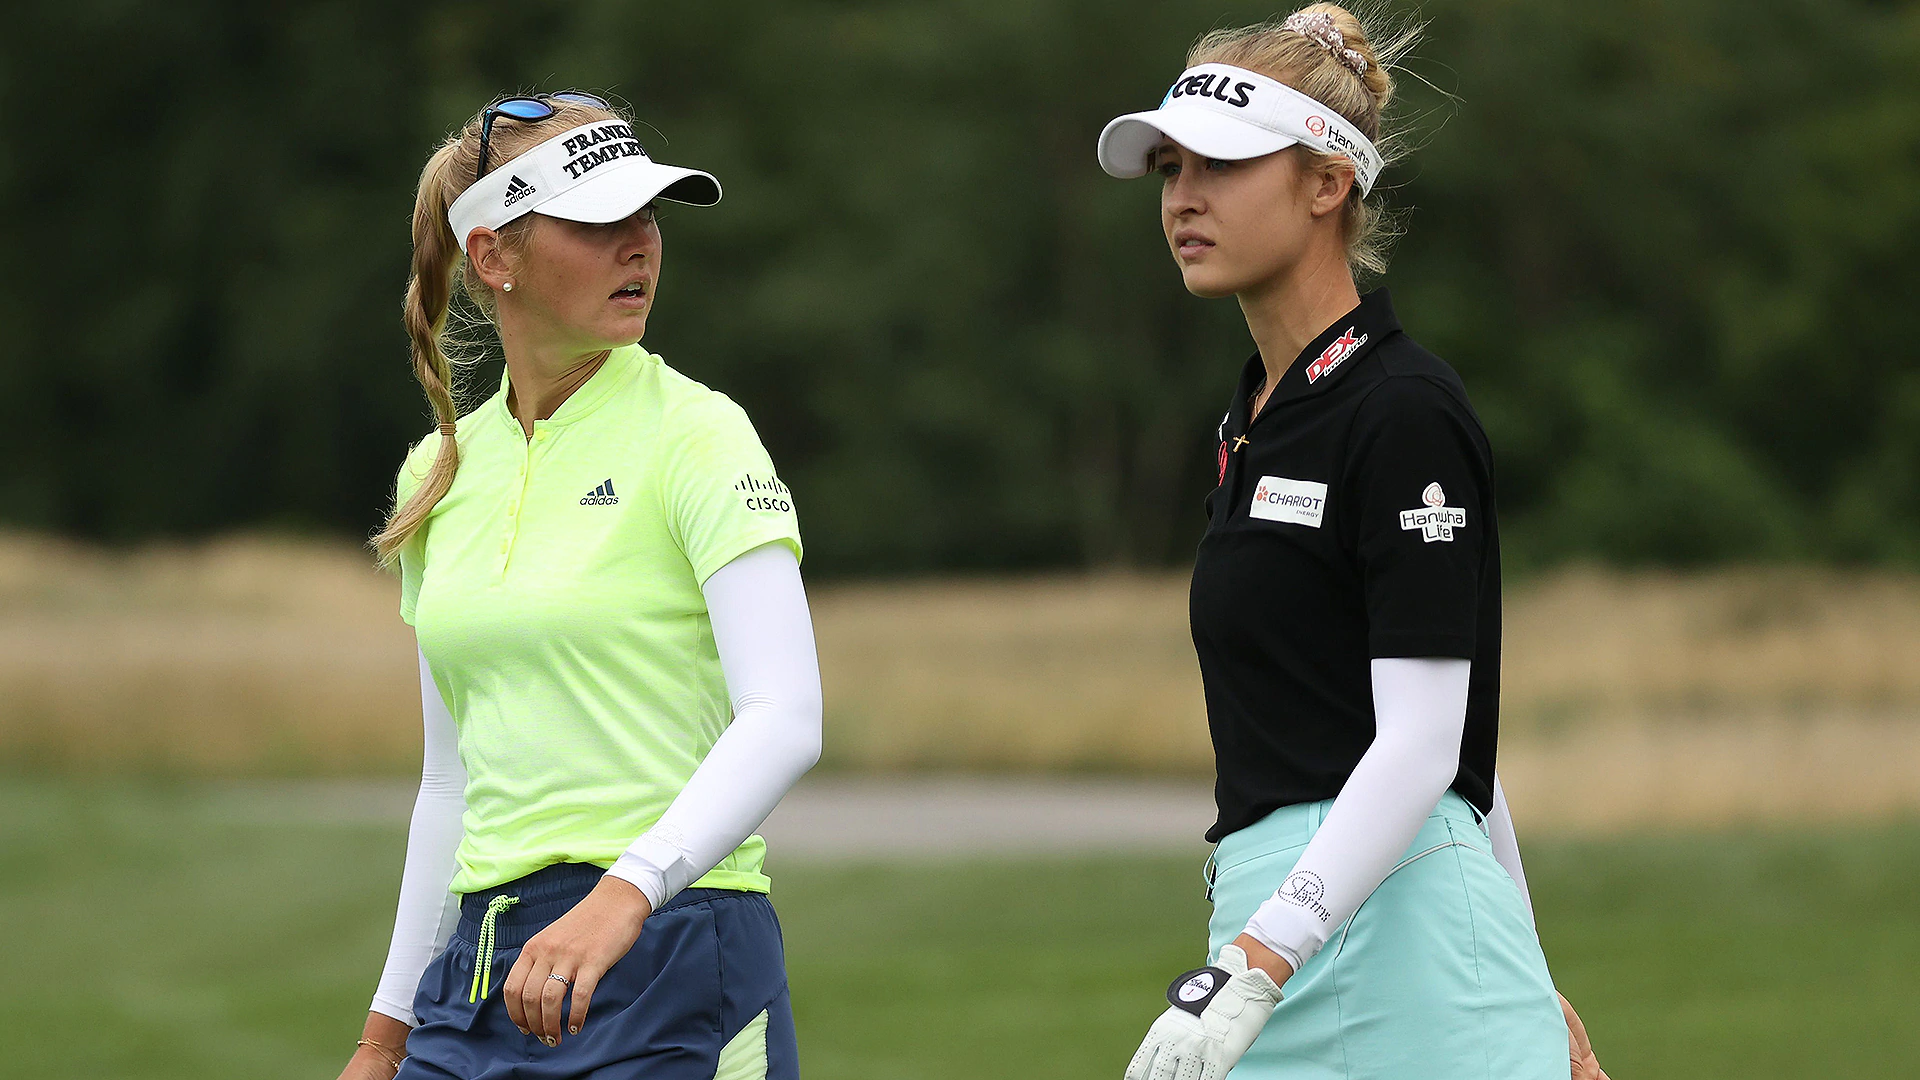 Like little brother in Paris, Korda sisters look to make some major noise at KPMG 4